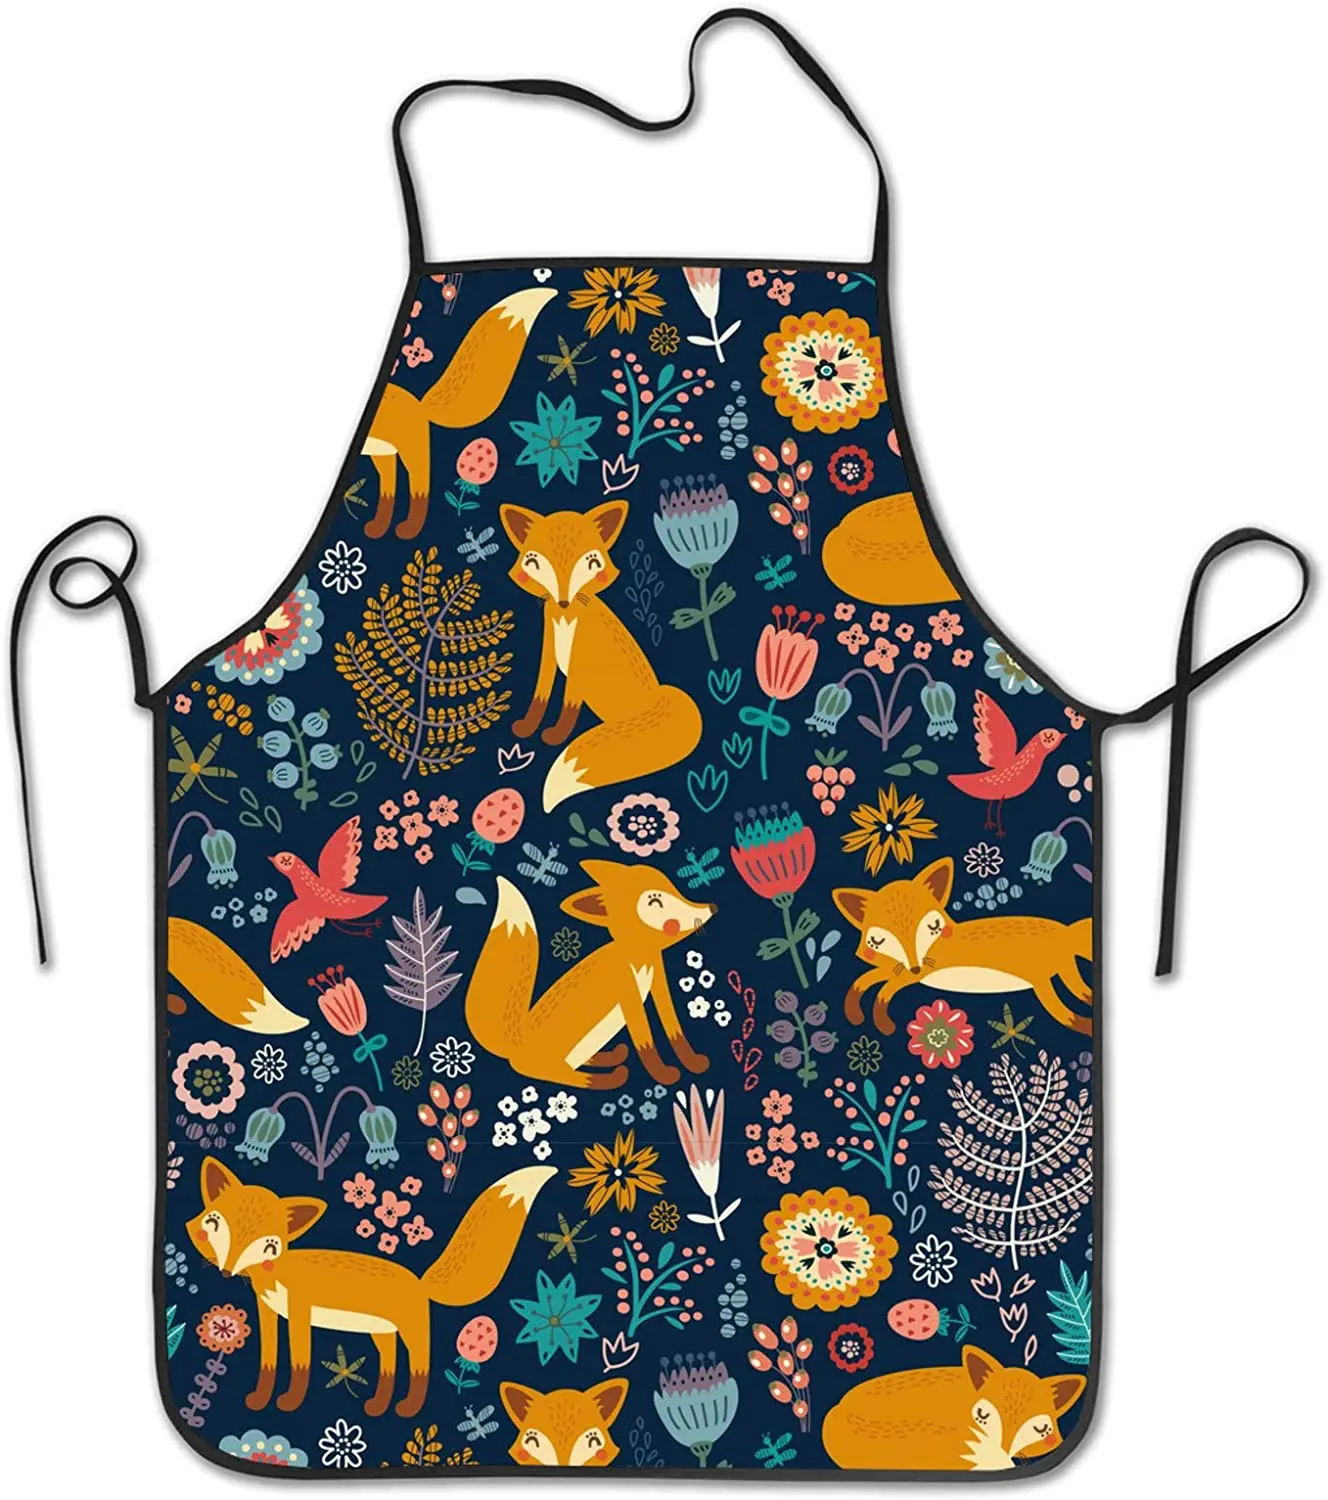 

Flowers And Fox Tools Chef Kitchen Cooking And Baking Aprons Bib Aprons